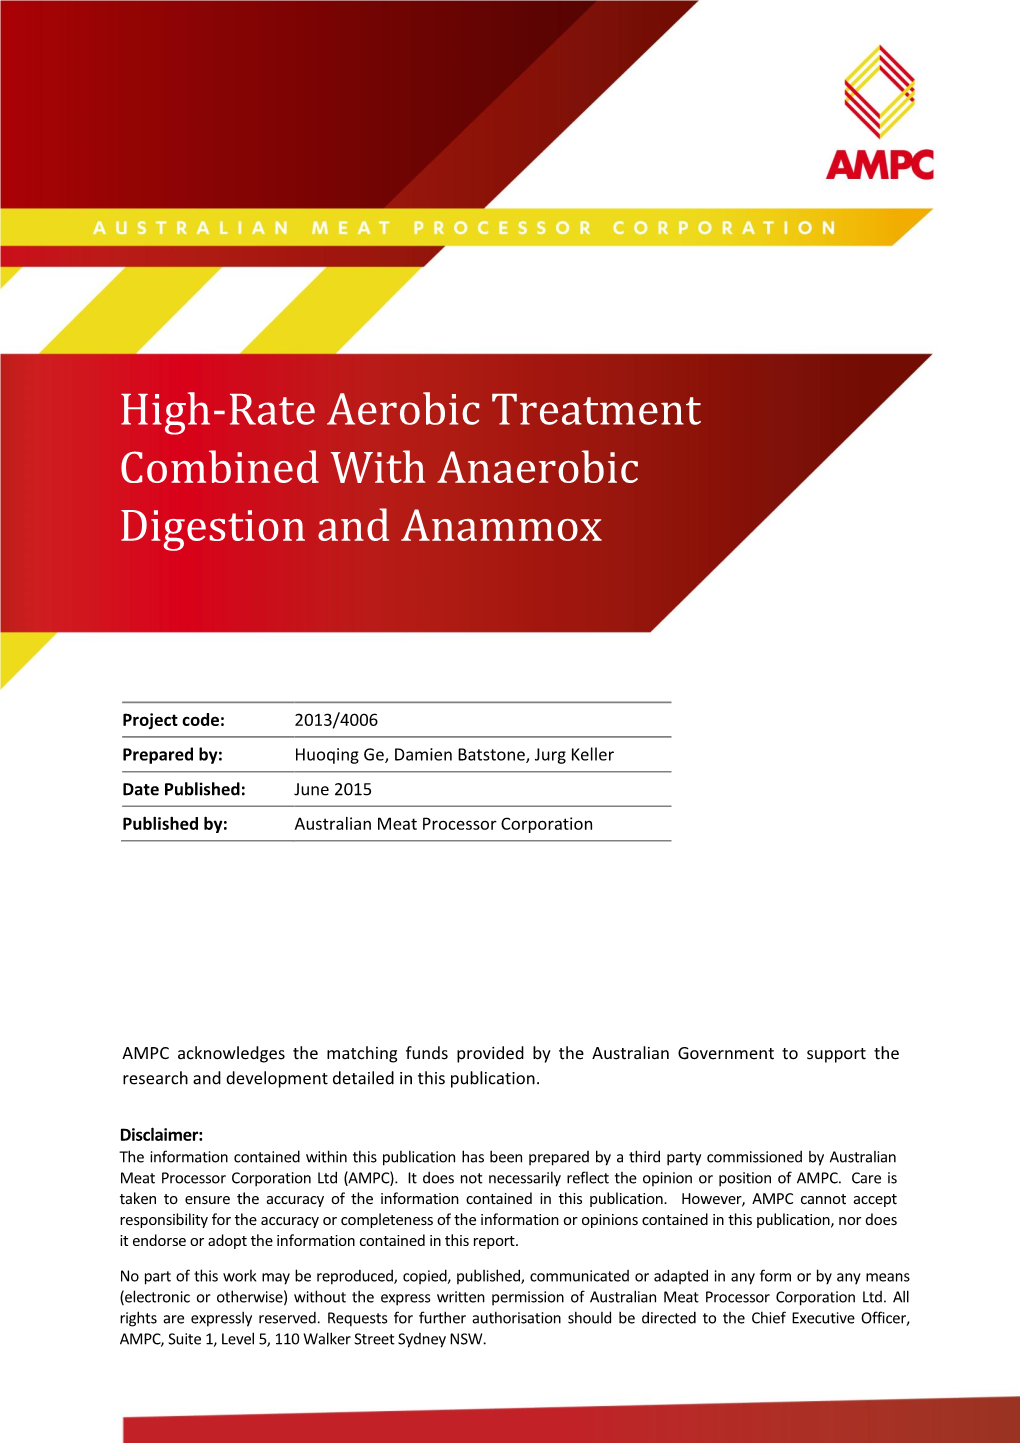 High-Rate Aerobic Treatment Combined with Anaerobic Digestion and Anammox